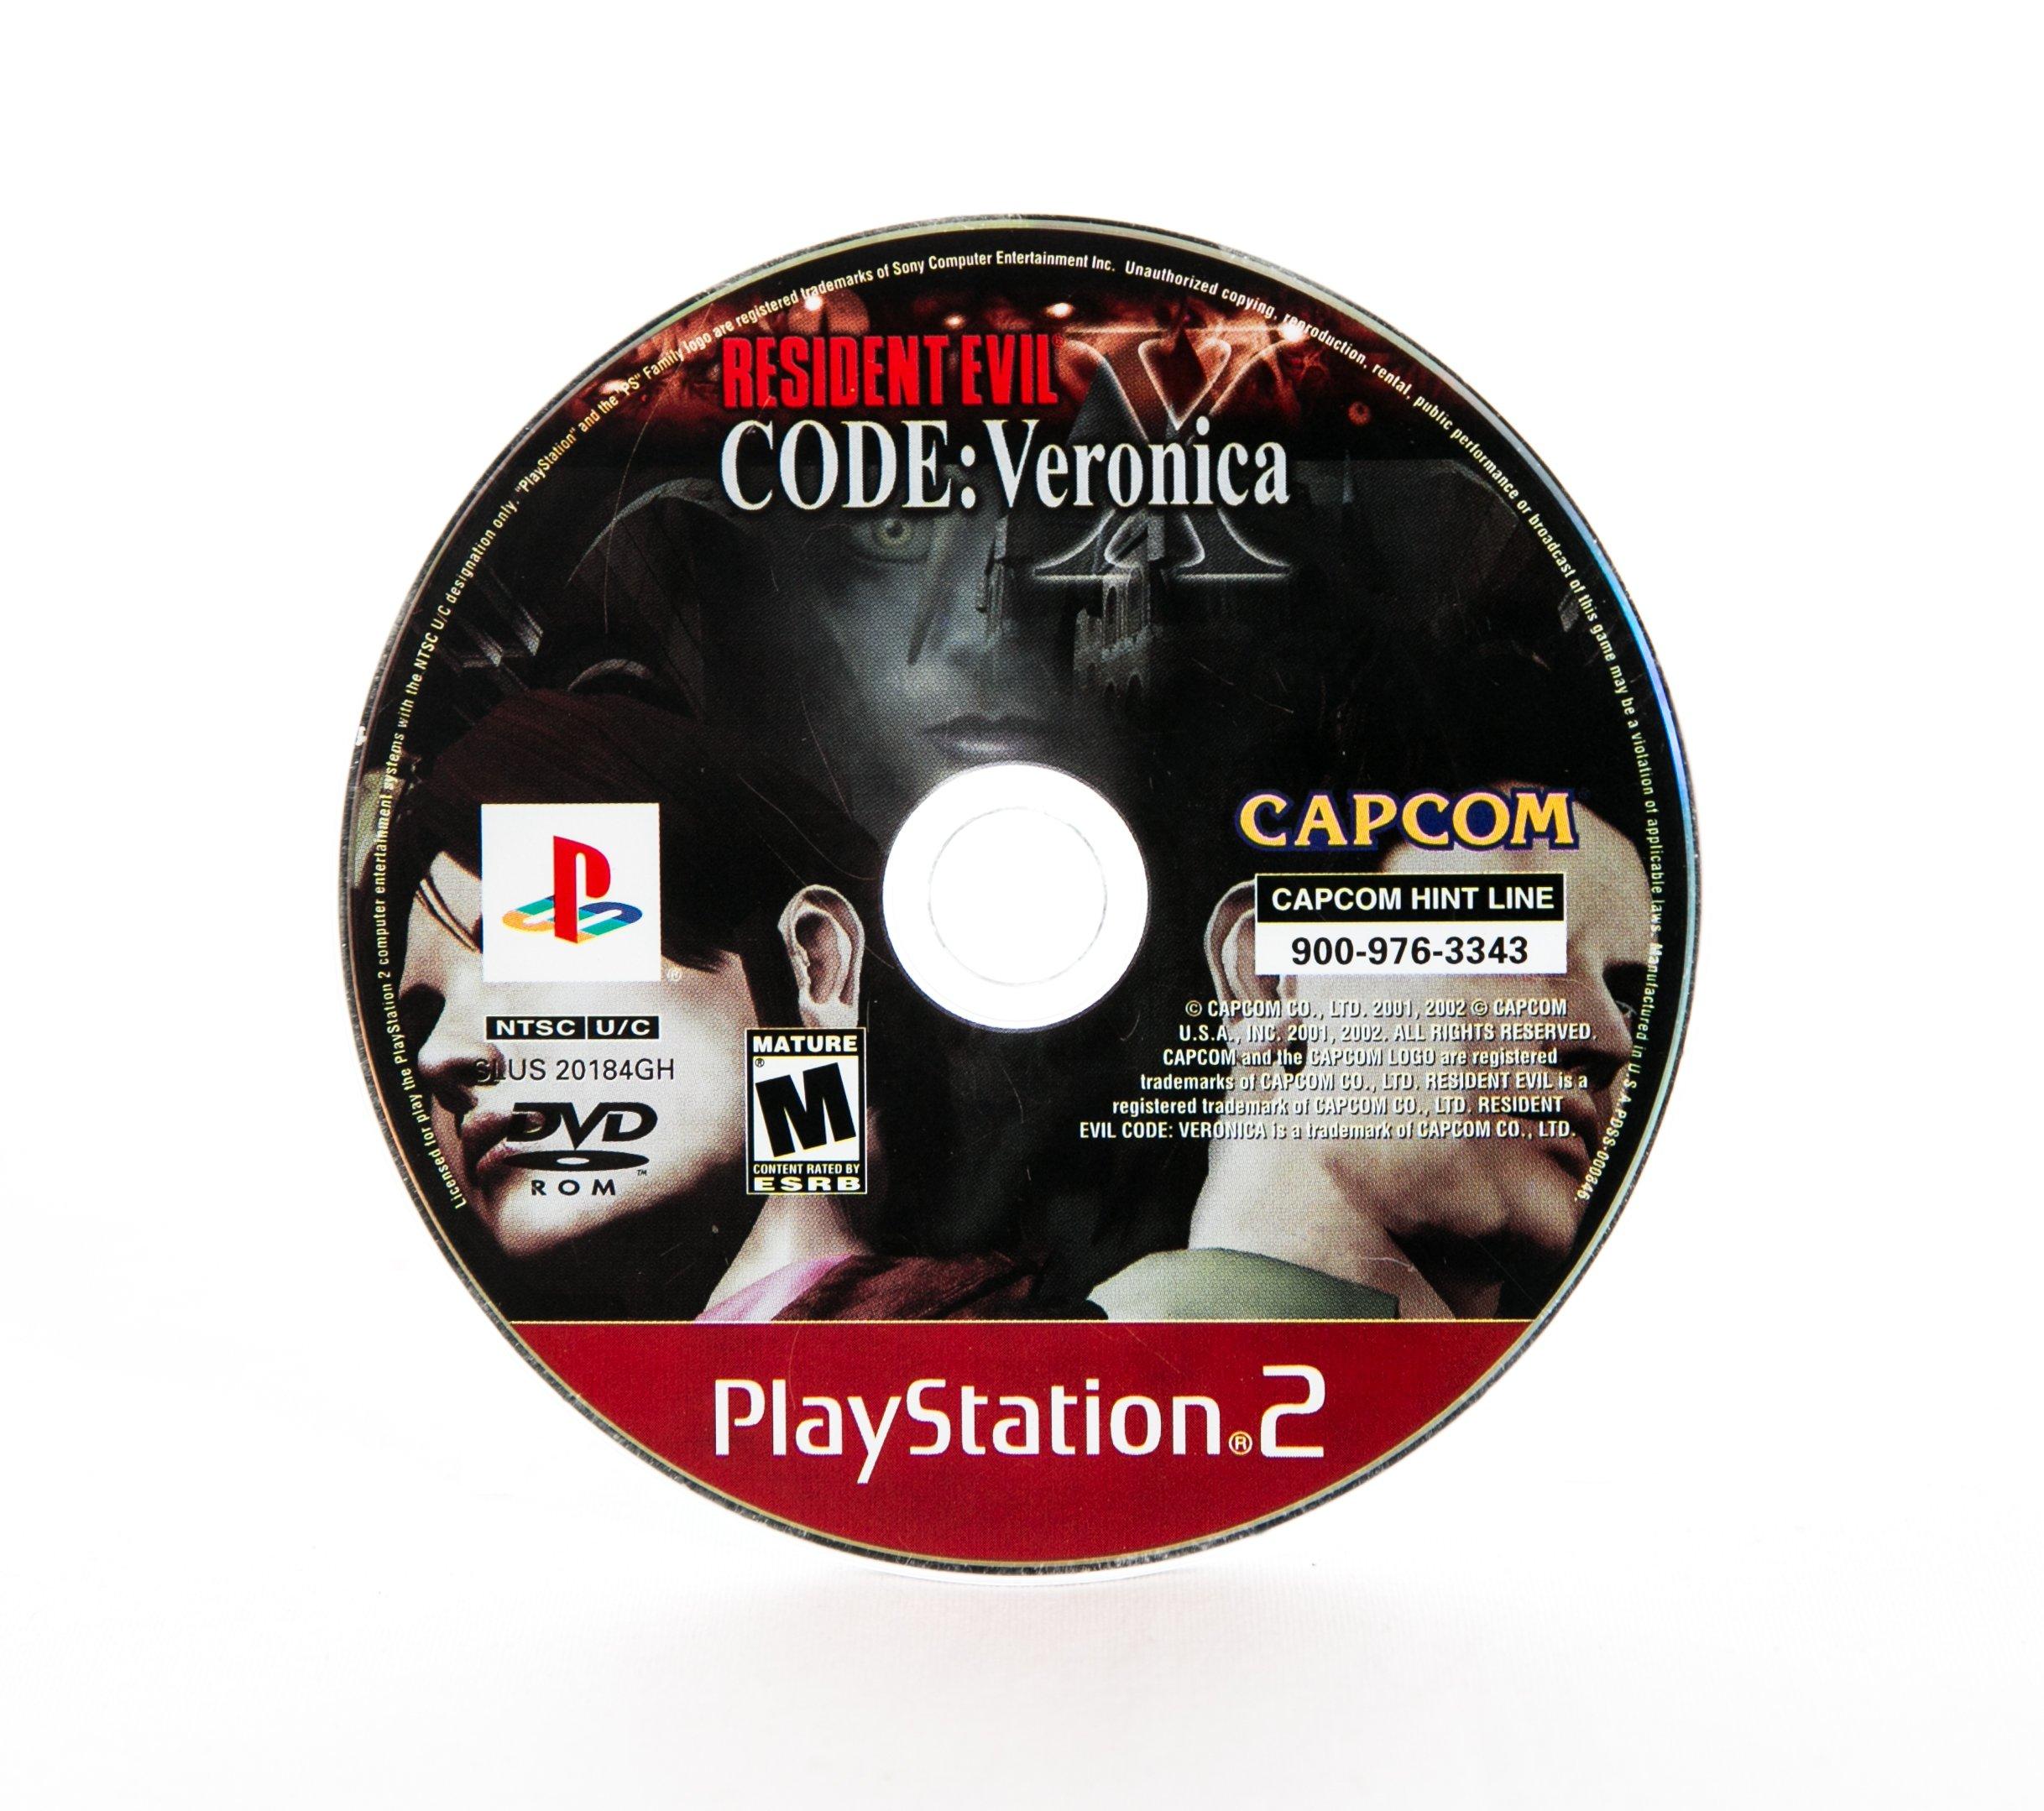 Resident Evil Code: Veronica X - PlayStation 2, PlayStation 2